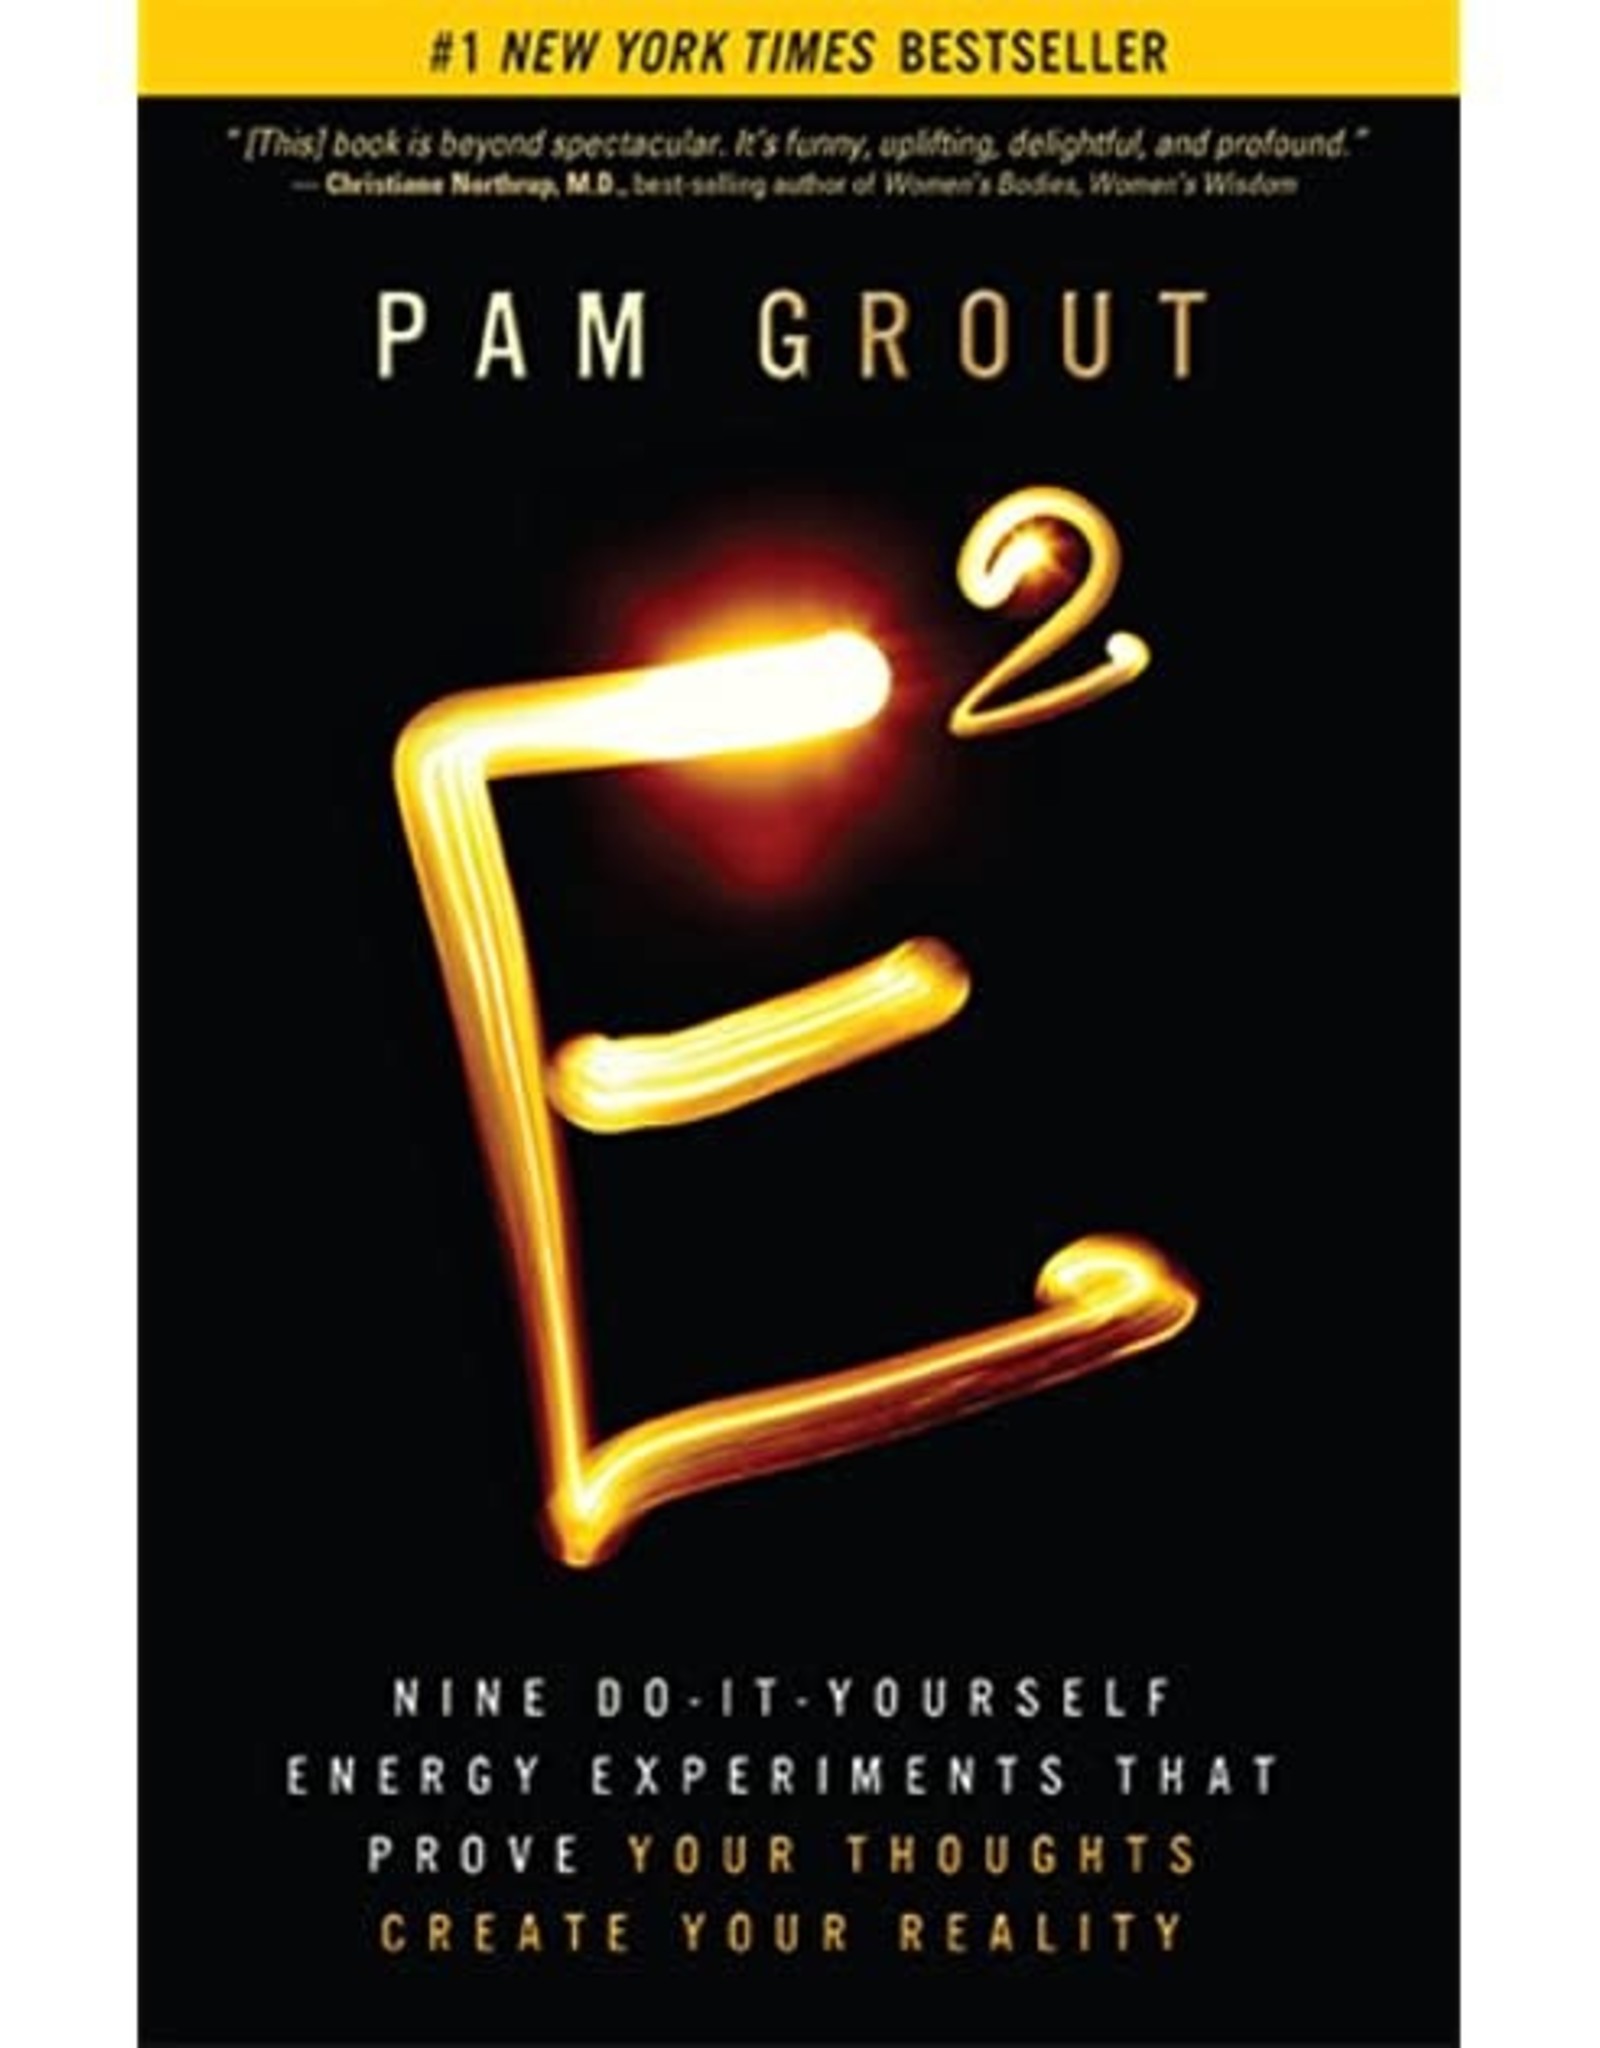 Pam Grout E Squared by Pam Grout